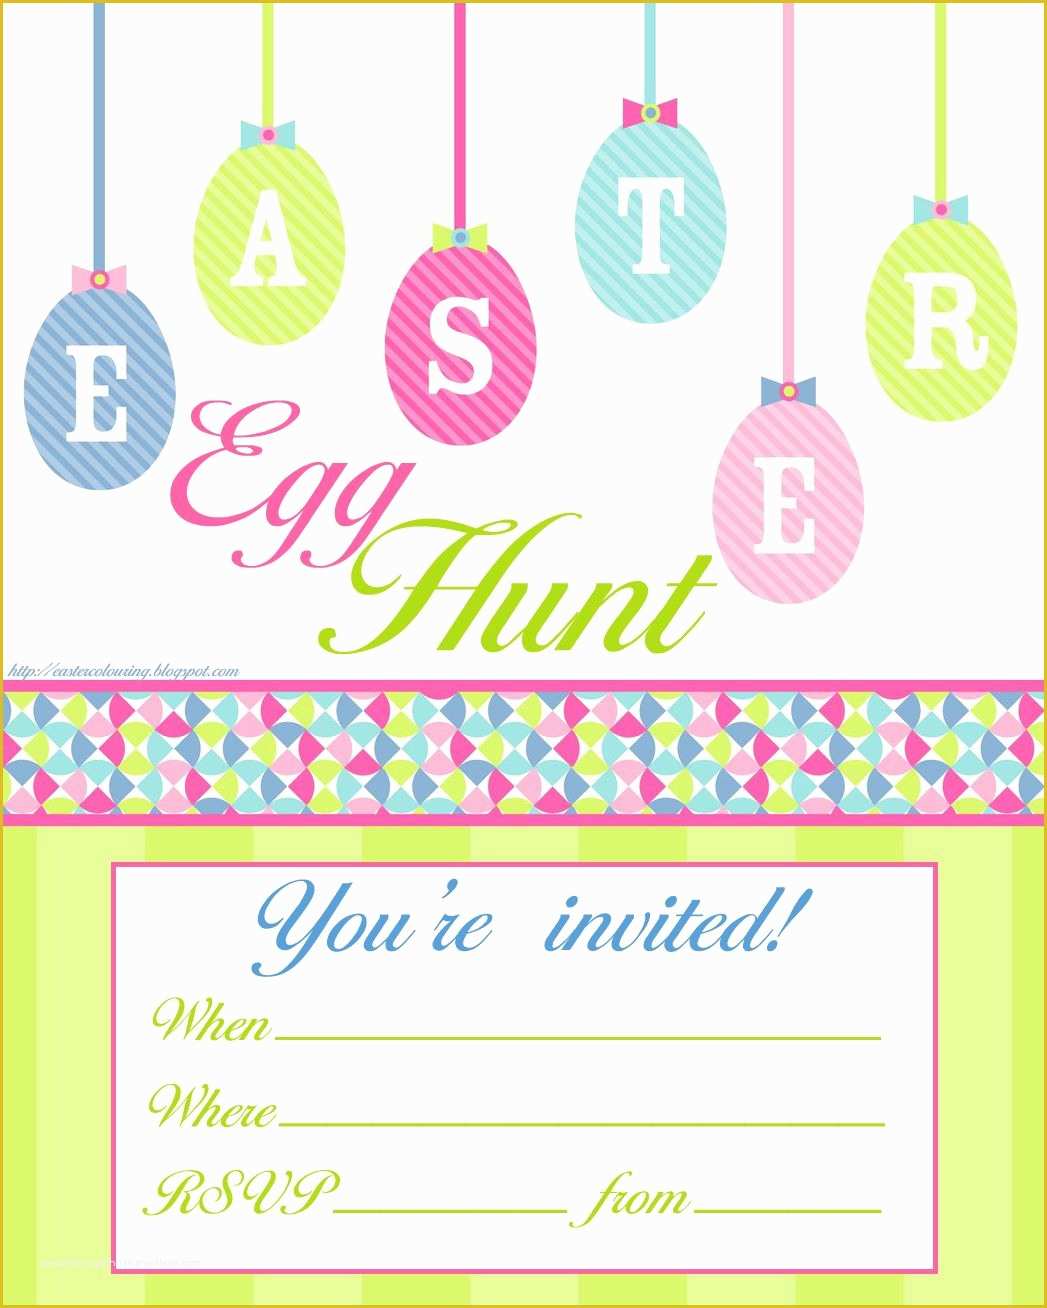 Spring Party Invitation Templates Free Of Easter Egg Hunt Free Printable Invitation Print However